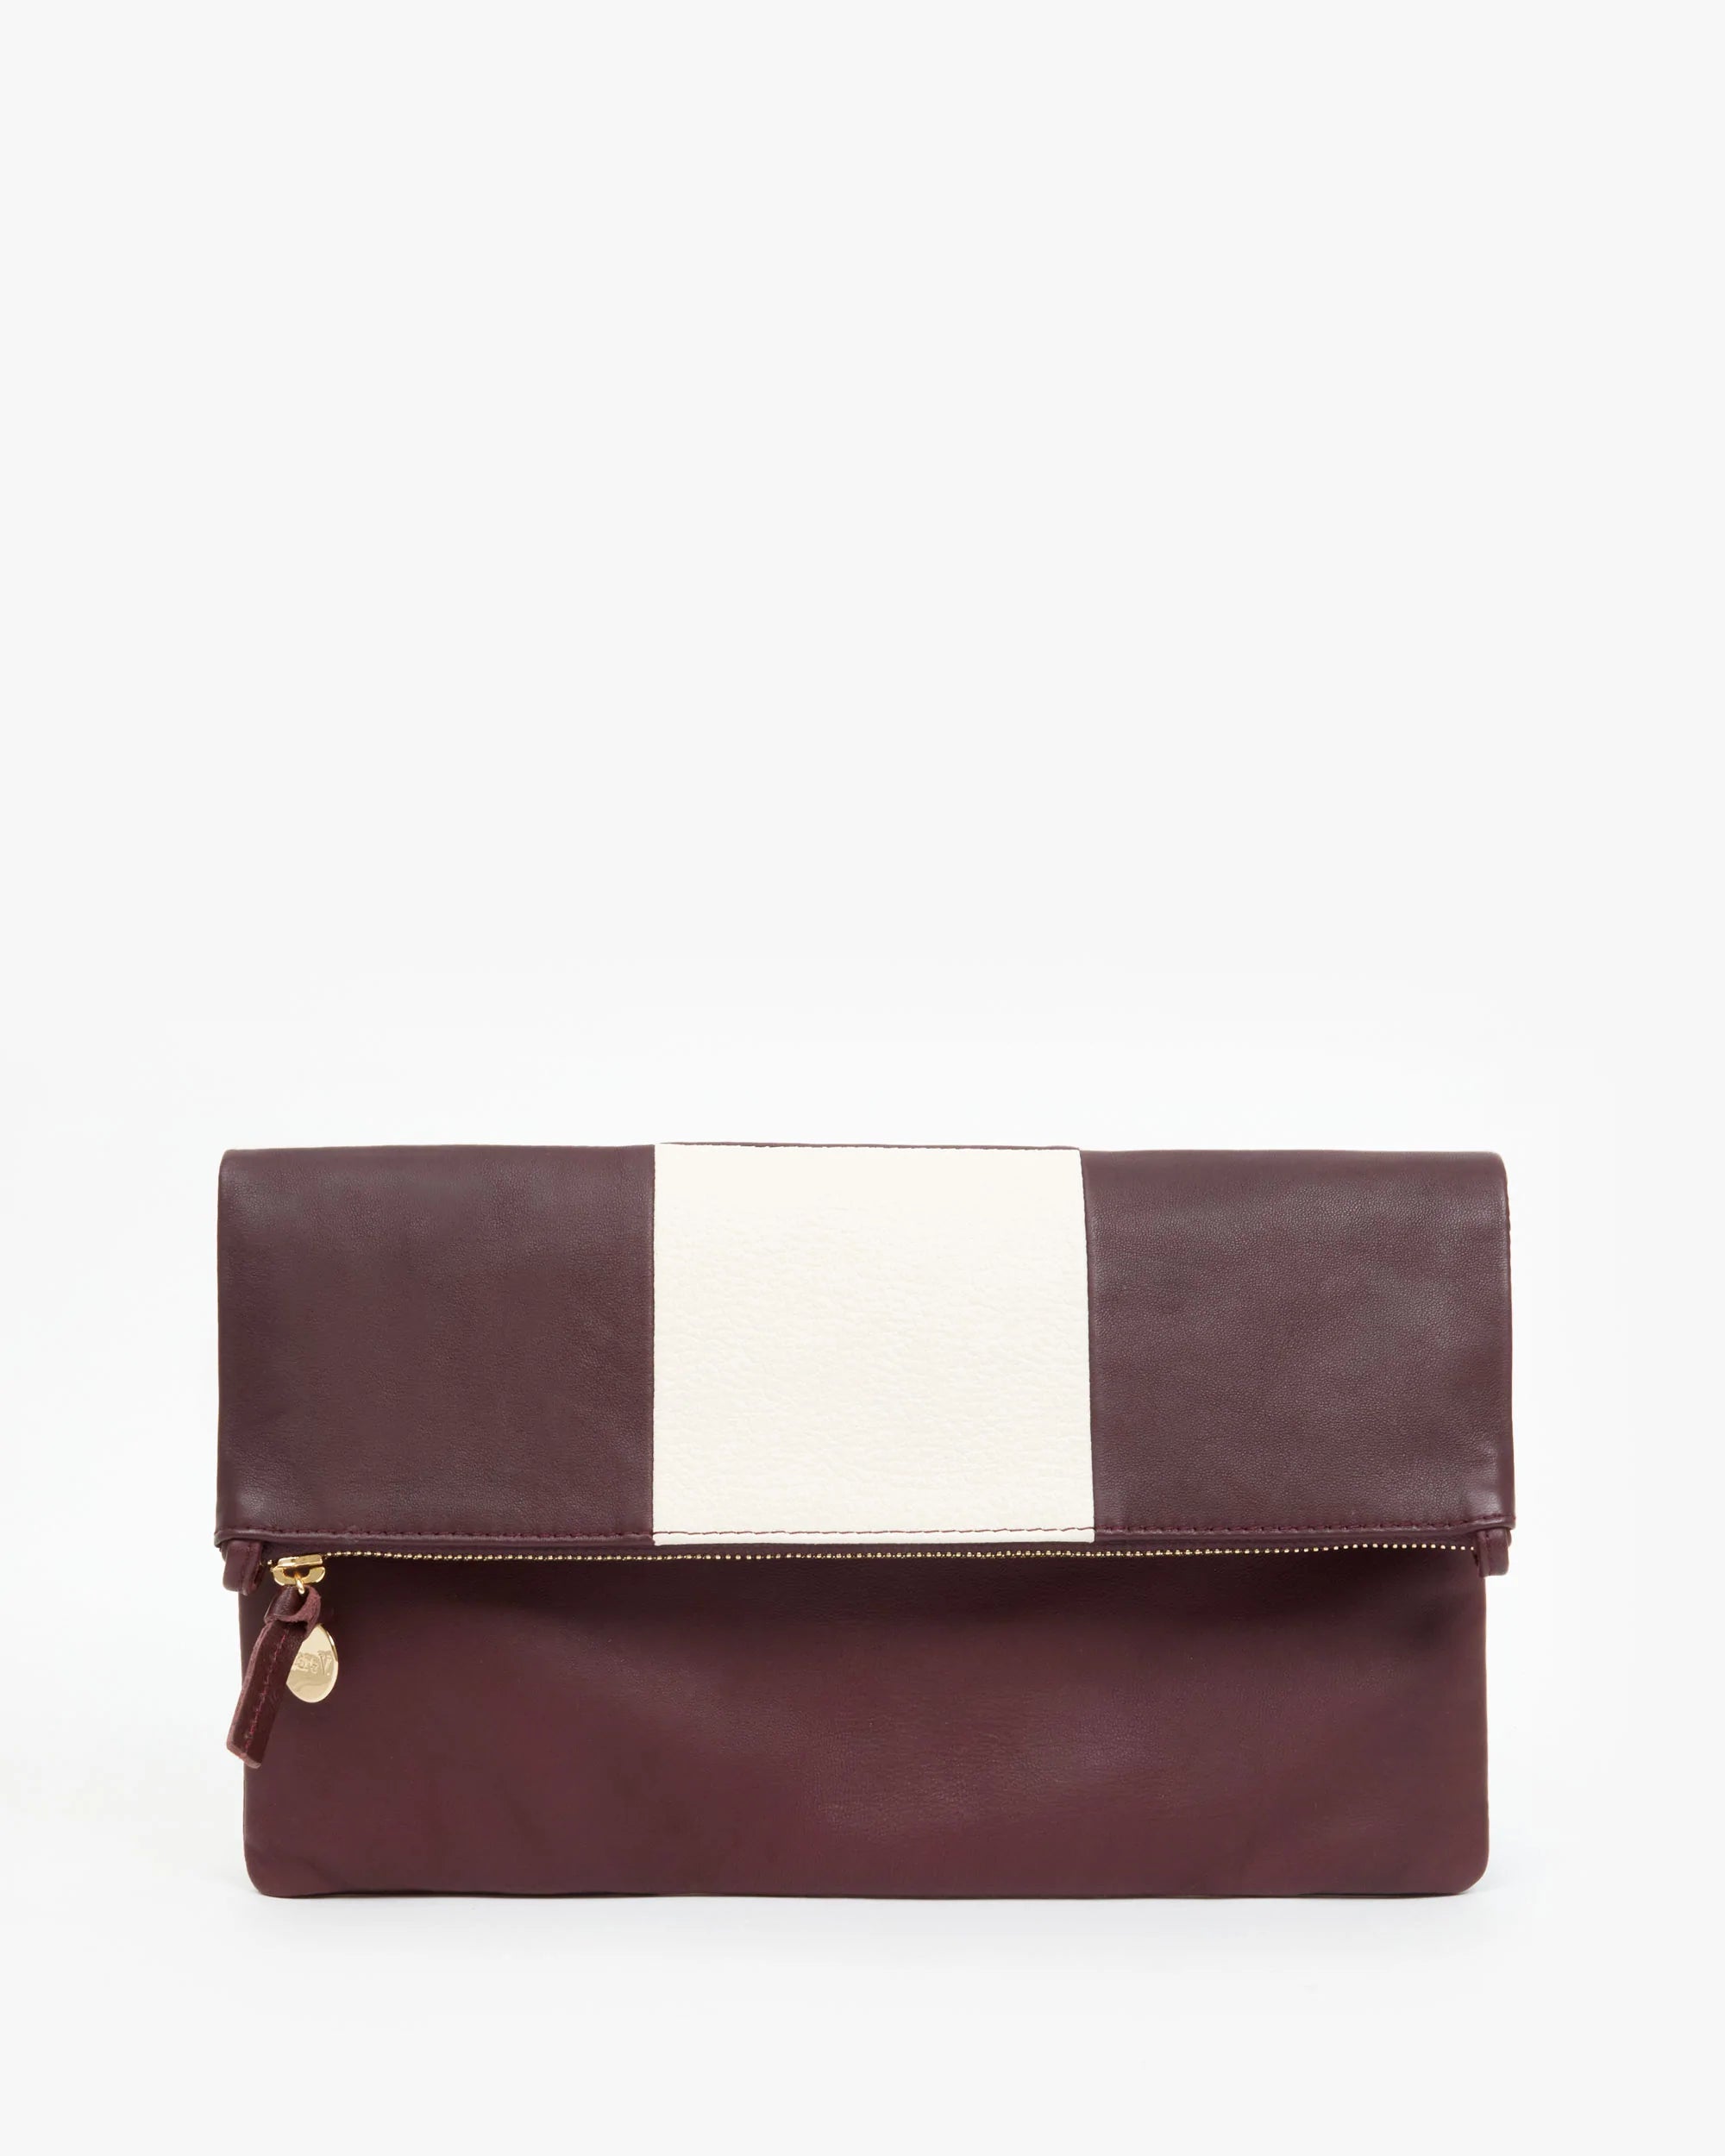 clare v foldover clutch with tabs